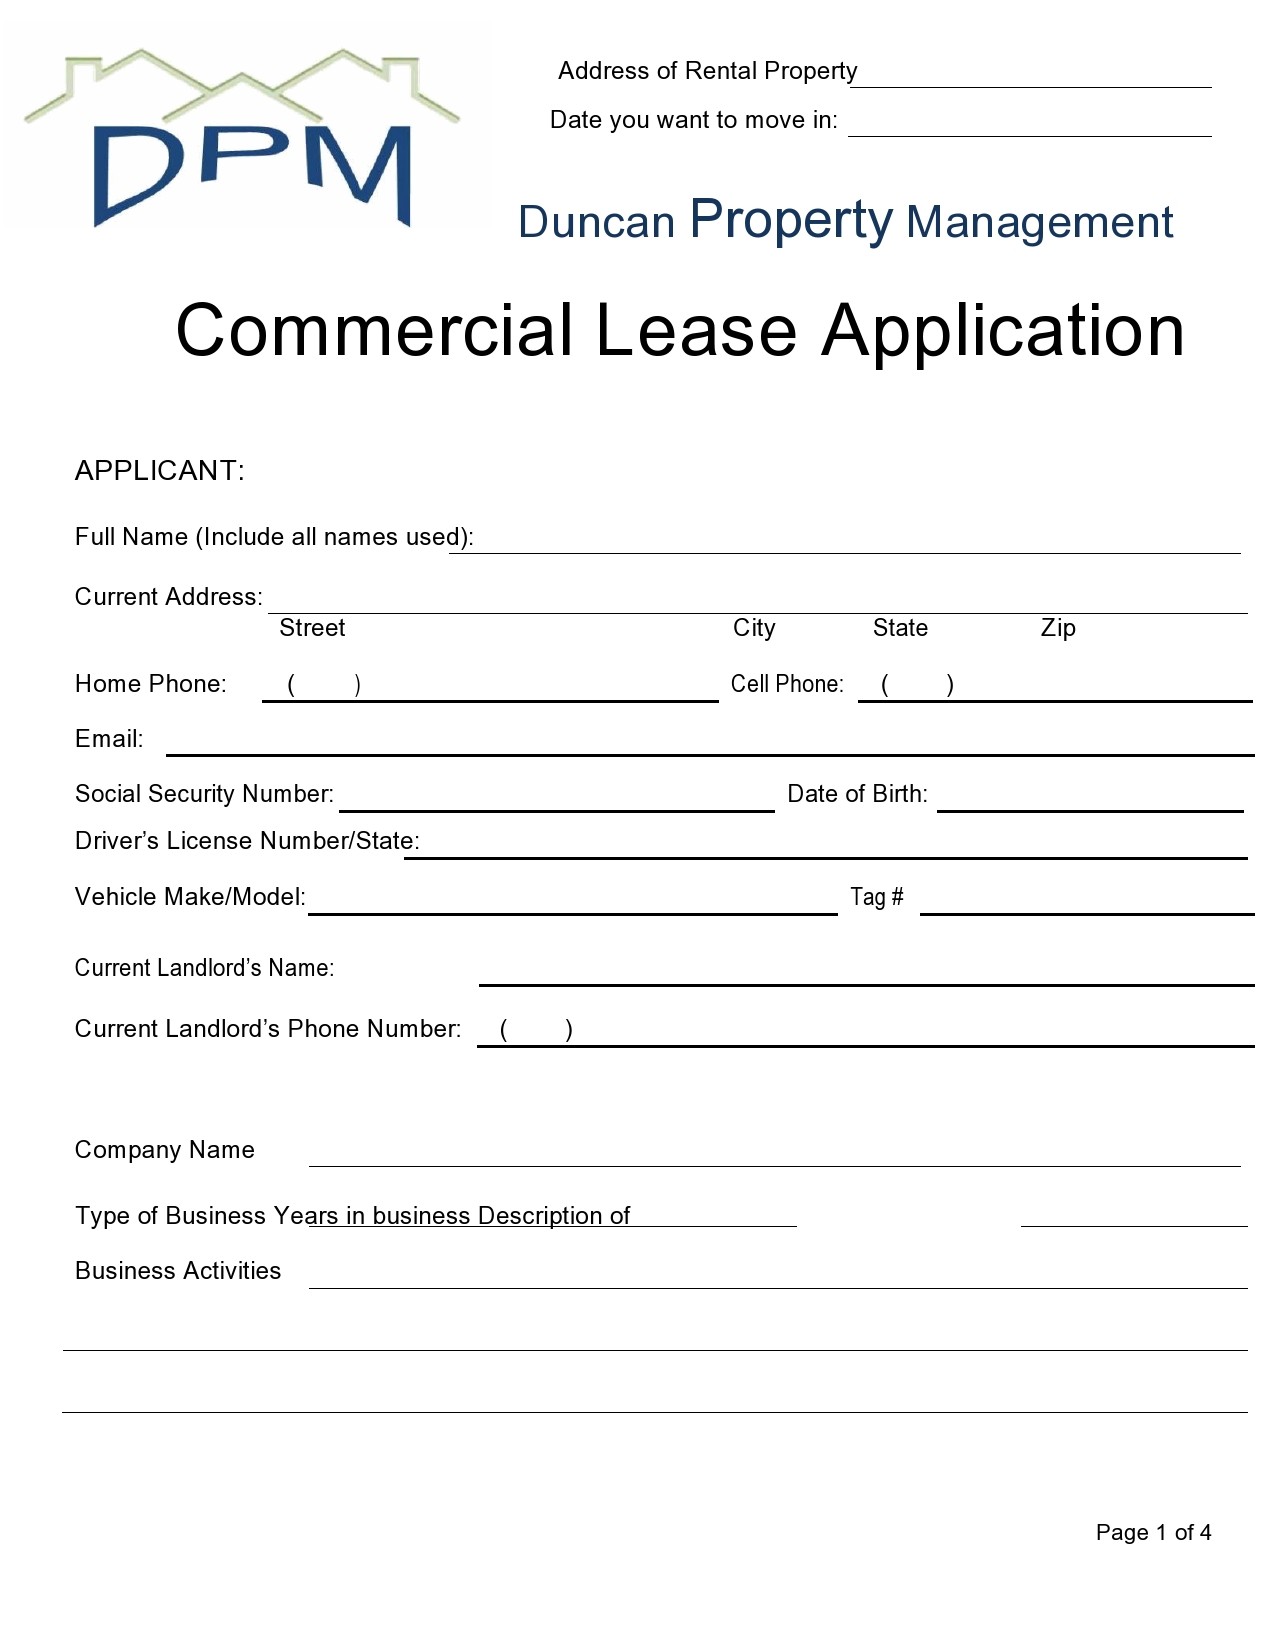 Free commercial lease application 23